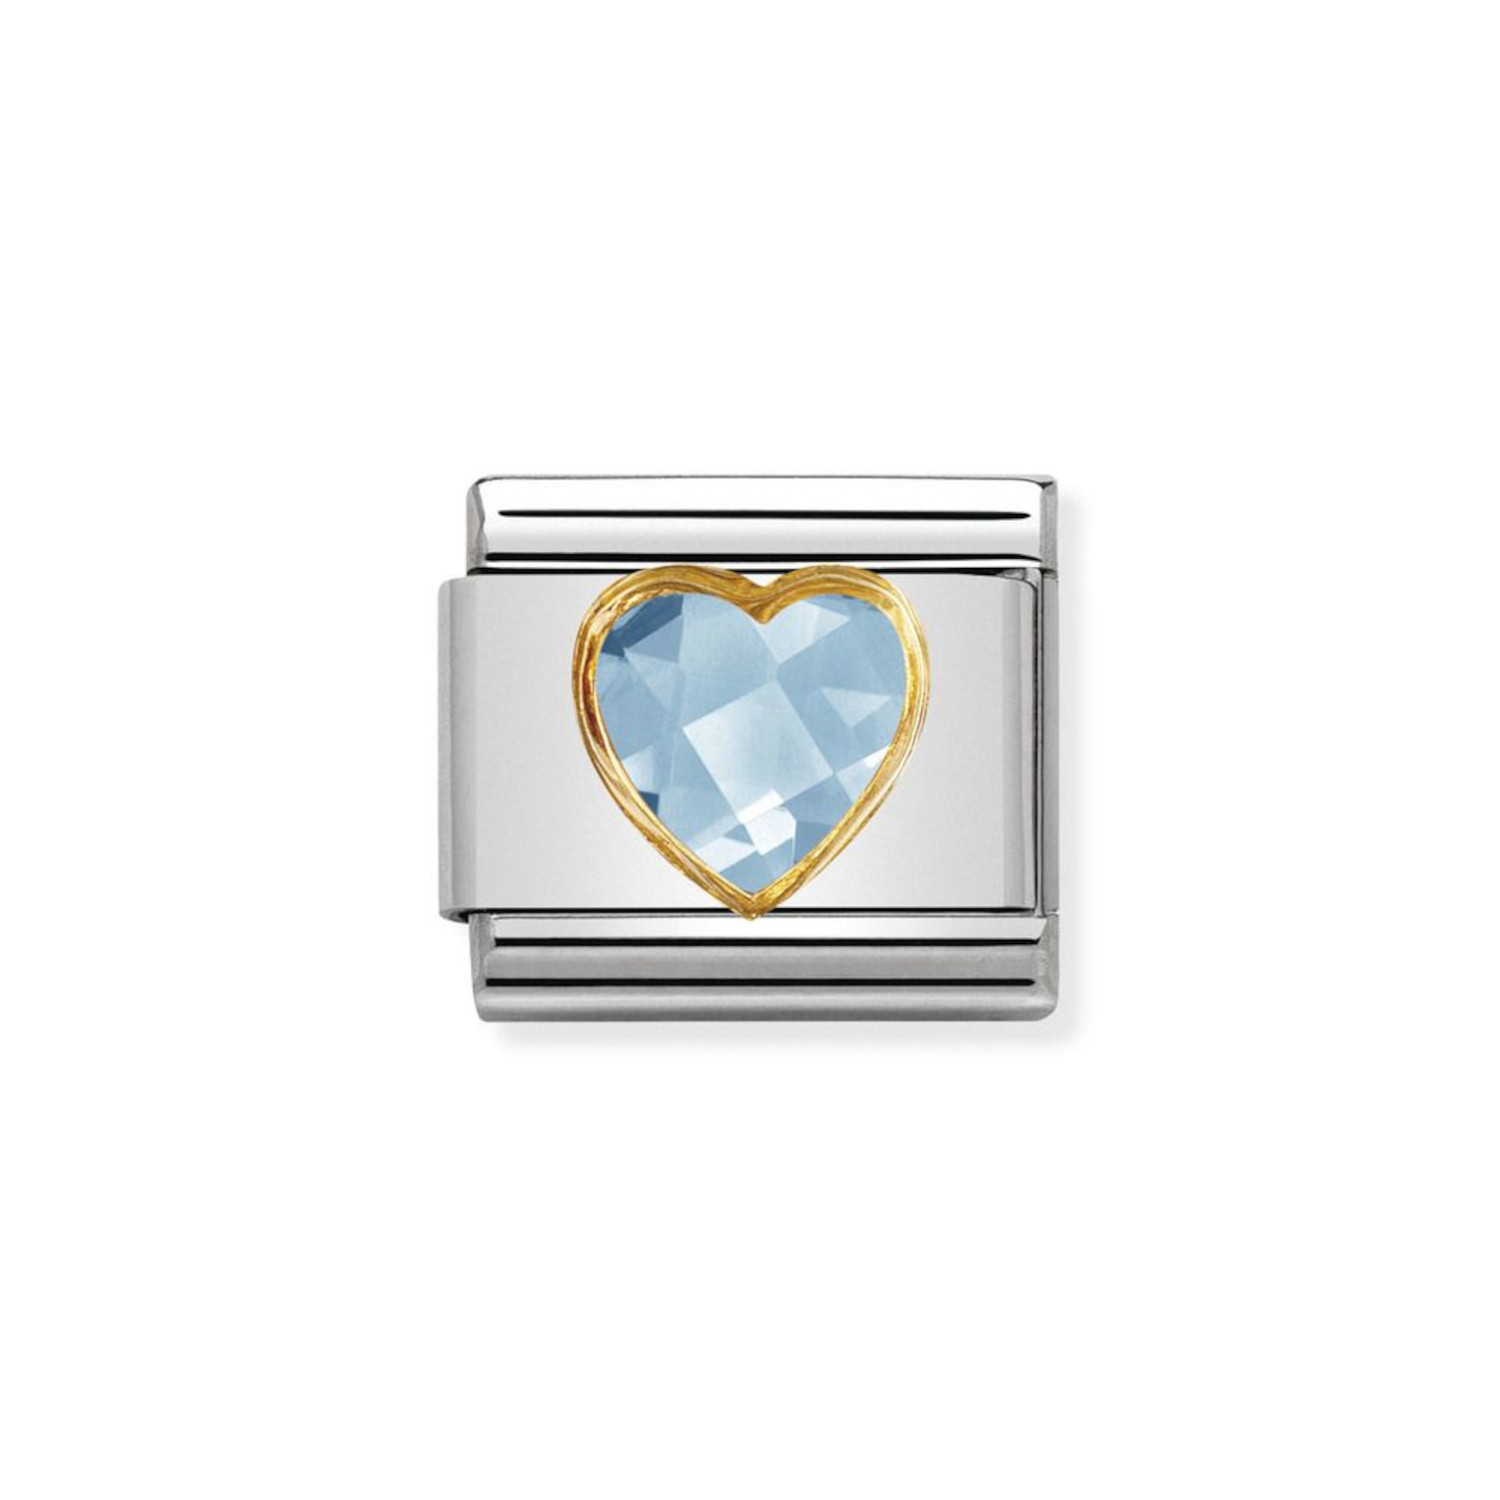 NOMINATION COMPOSABLE CLASSIC LINK IN 18K GOLD WITH MULTIFACETED LIGHT BLUE HEART 030610/006